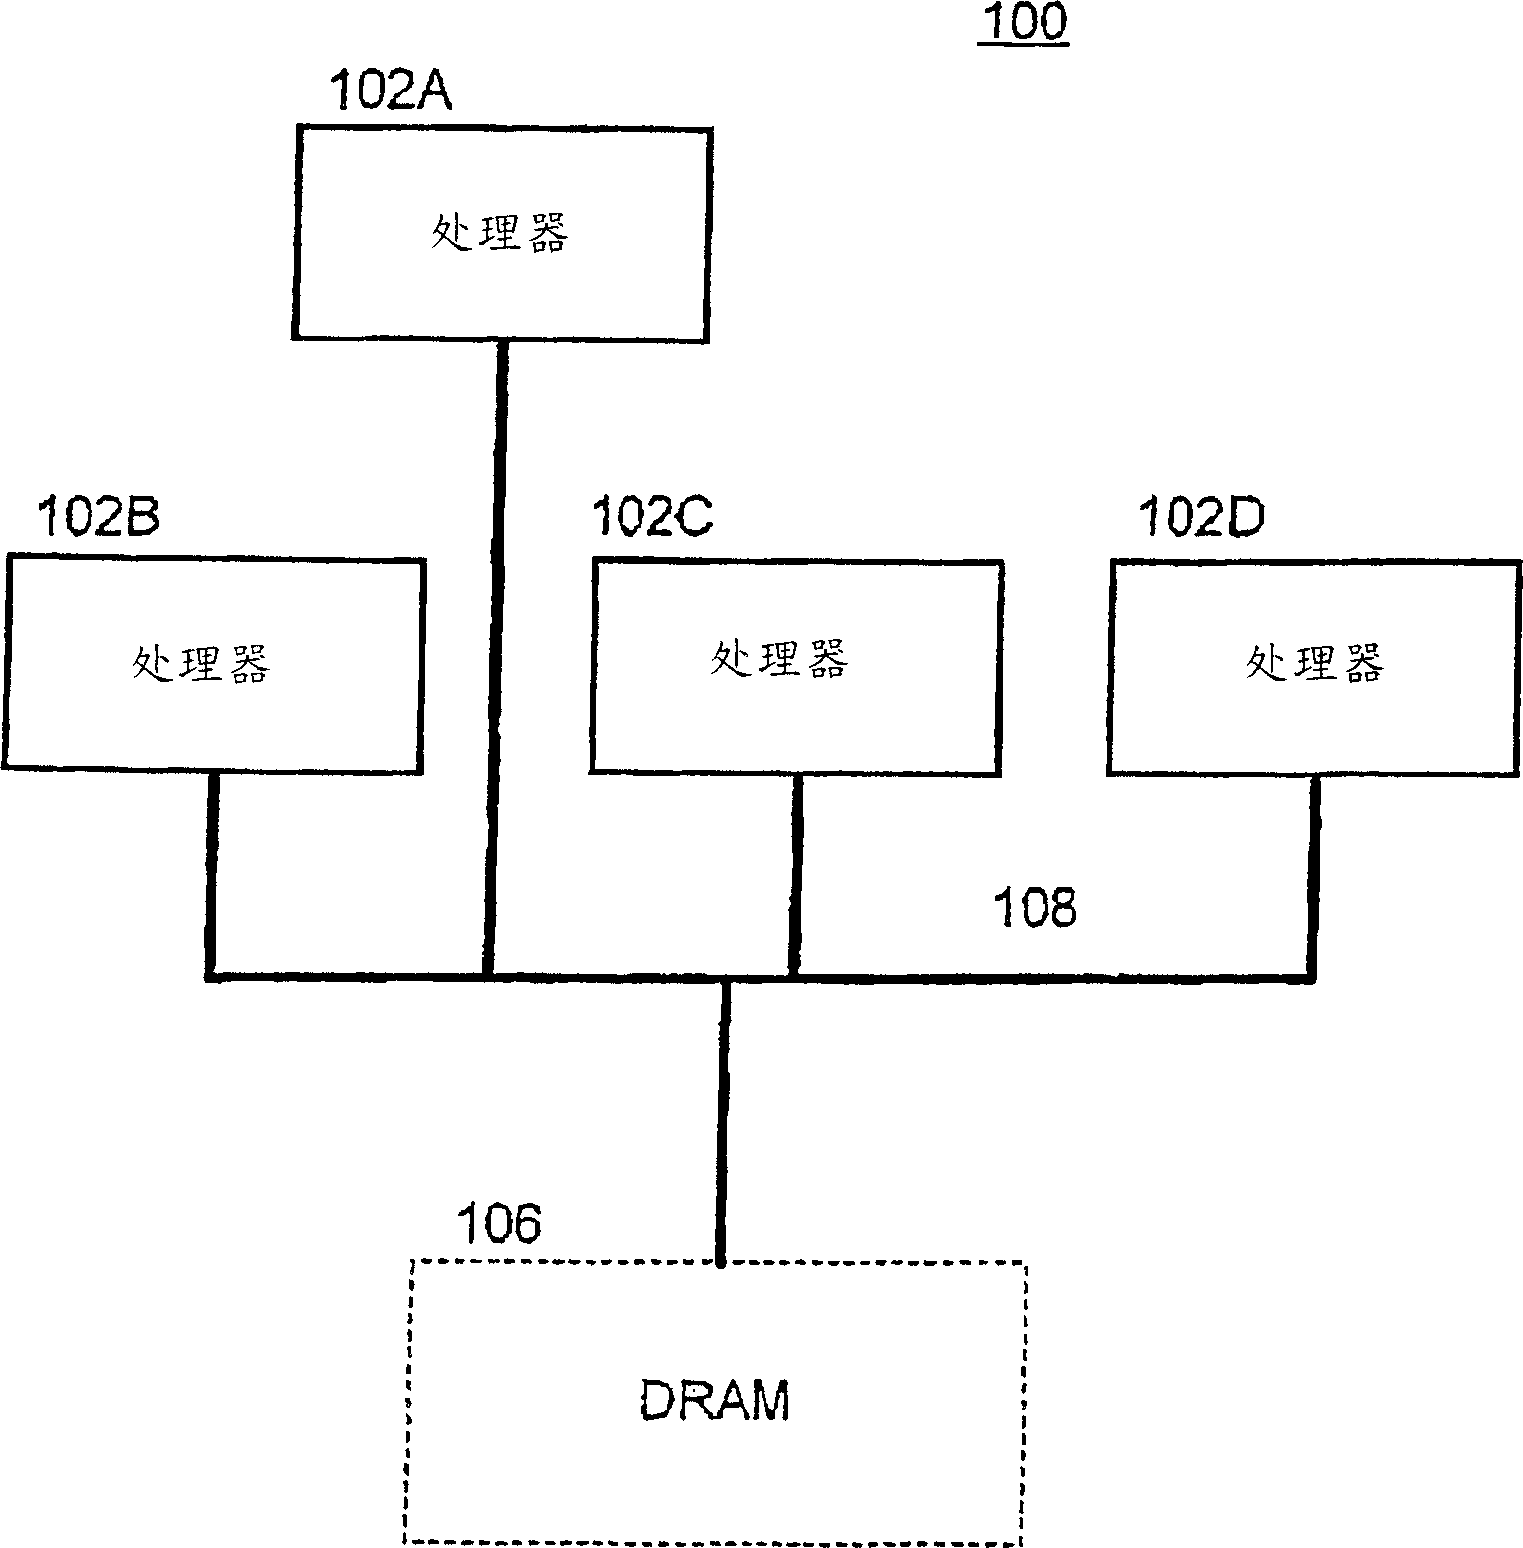 Methods and apparatus for reducing power dissipation in a multi-processor system